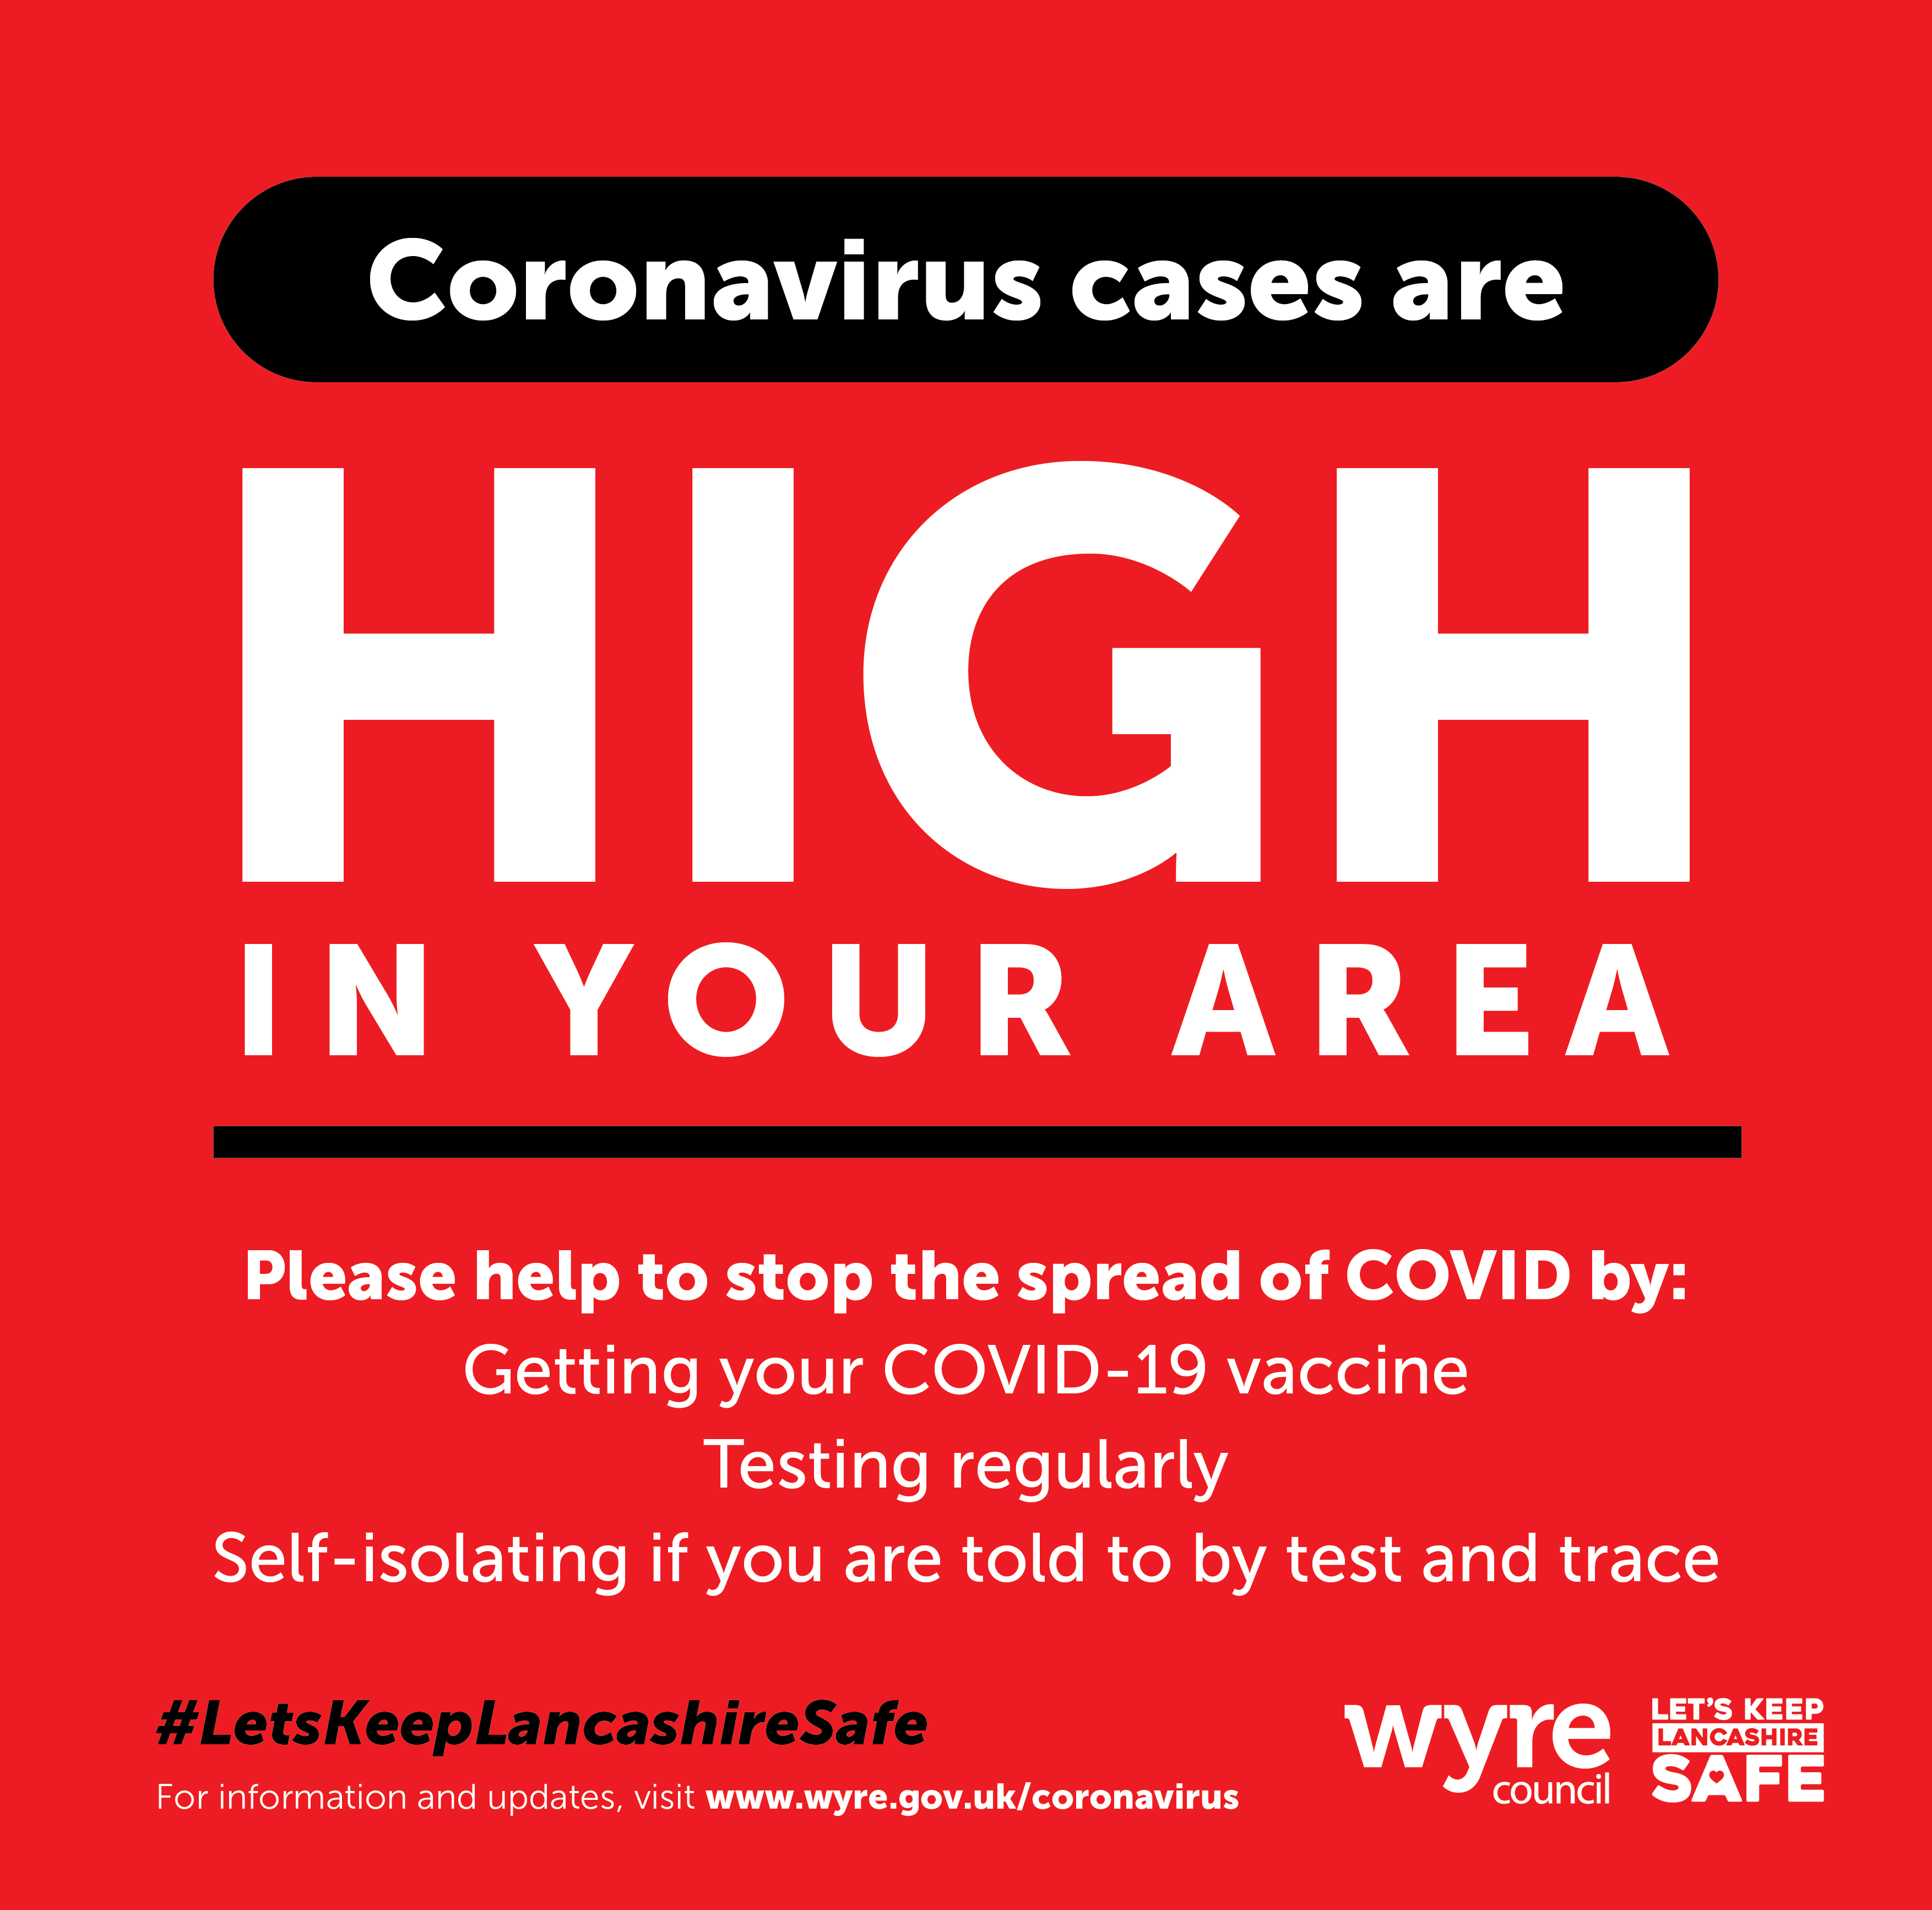 COVID cases are high in Wyre